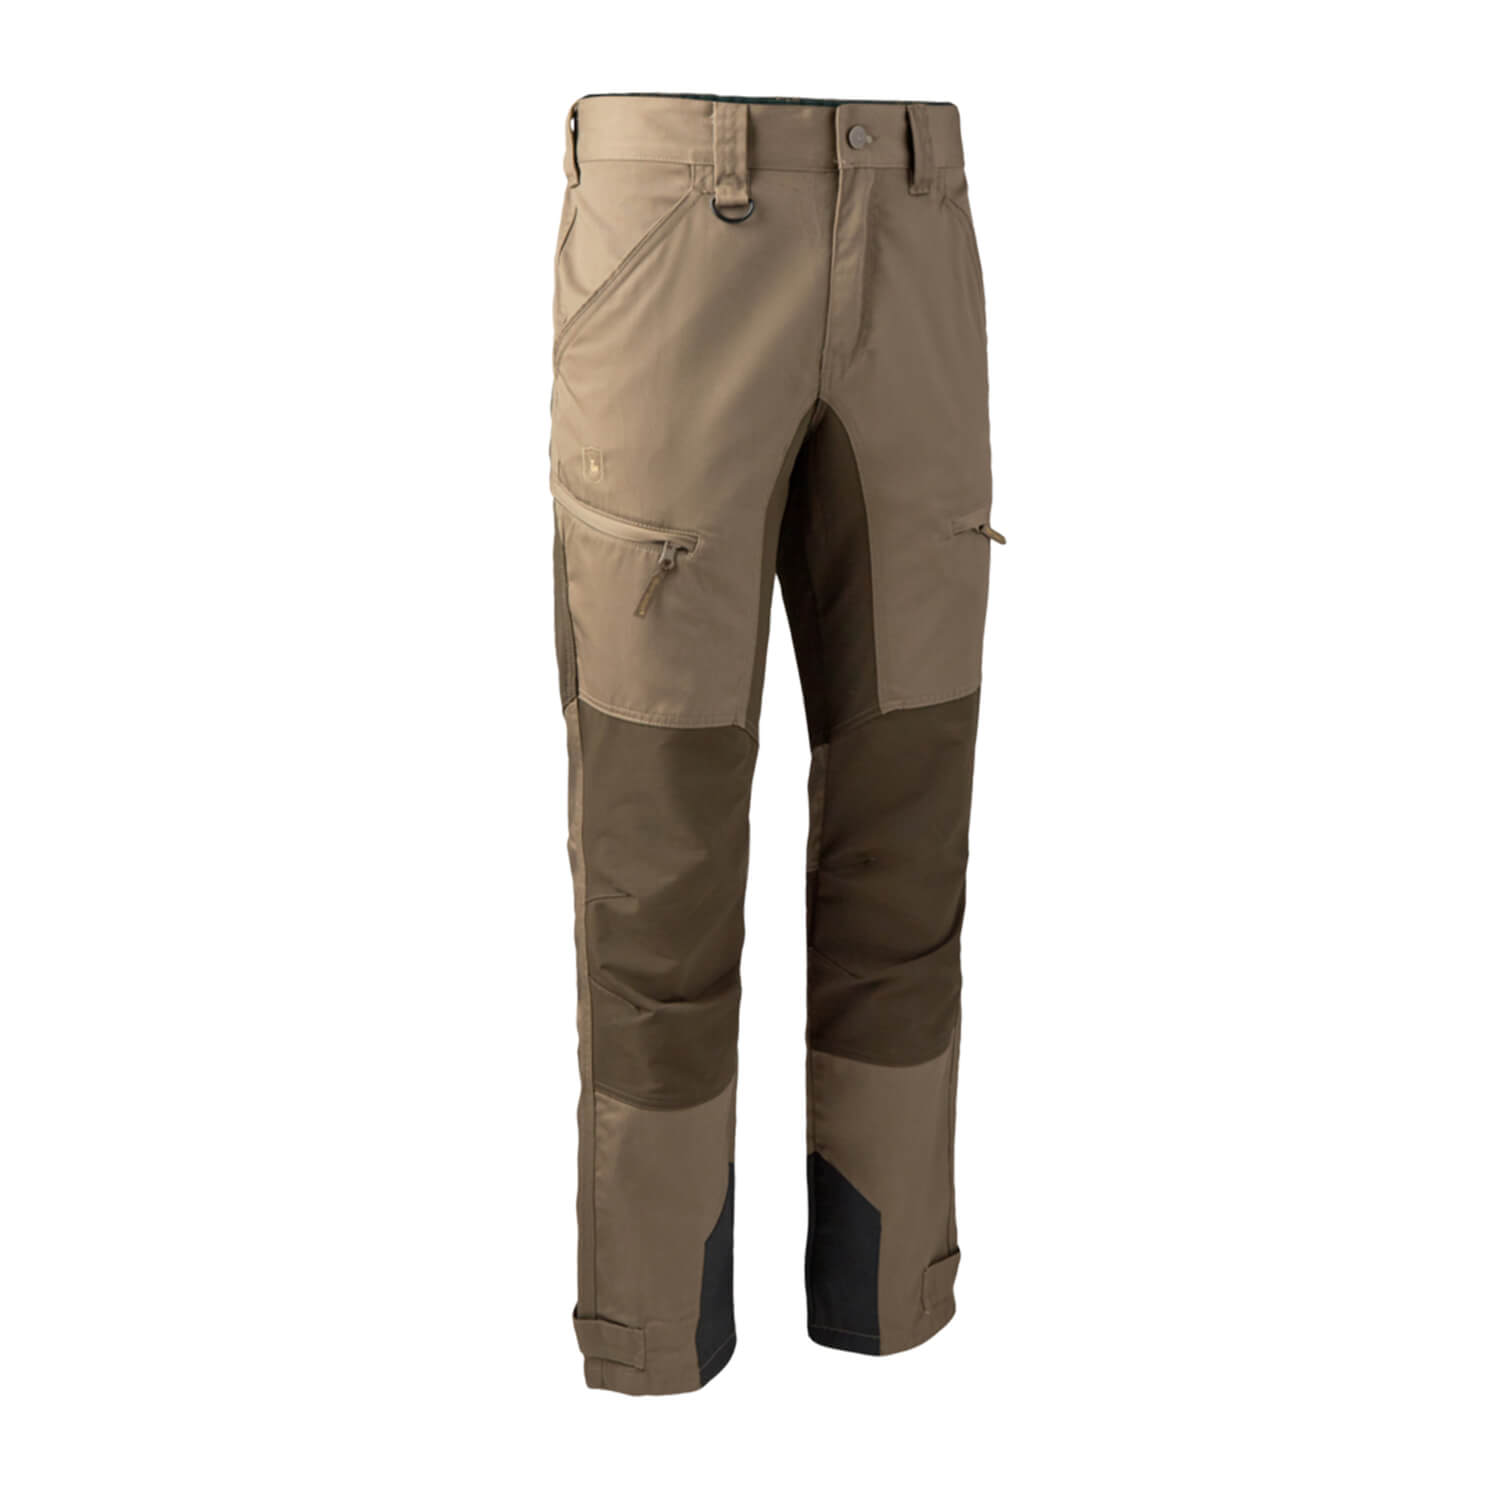 Deerhunter Stretch Trousers Rogaland (Driftwood) - Hunting Trousers